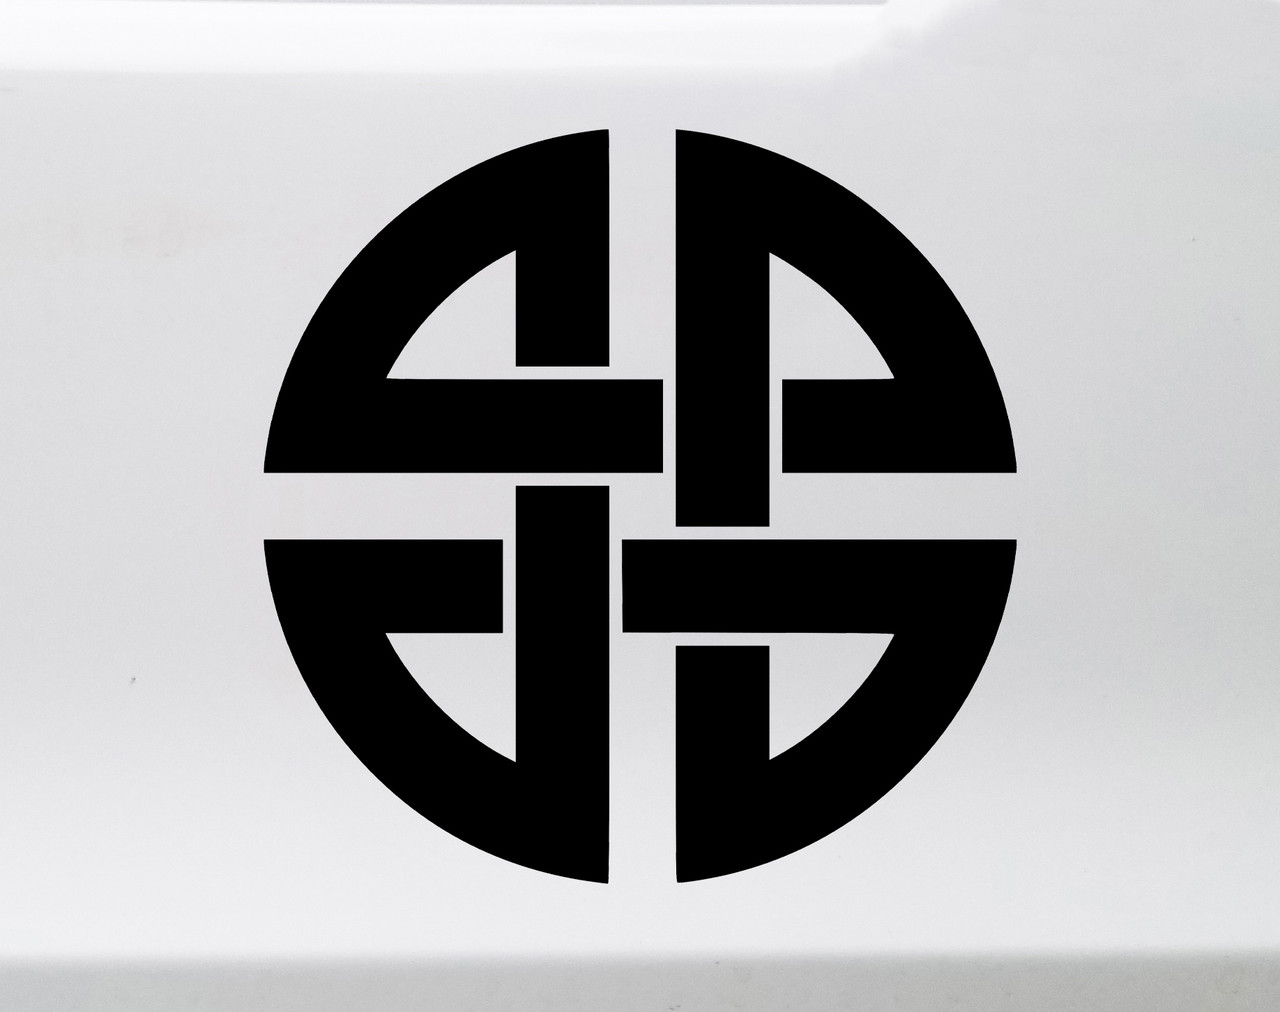 Shield Knot Vinyl Decal - Norse Four Corners Quaternary Knot - Die Cut Sticker